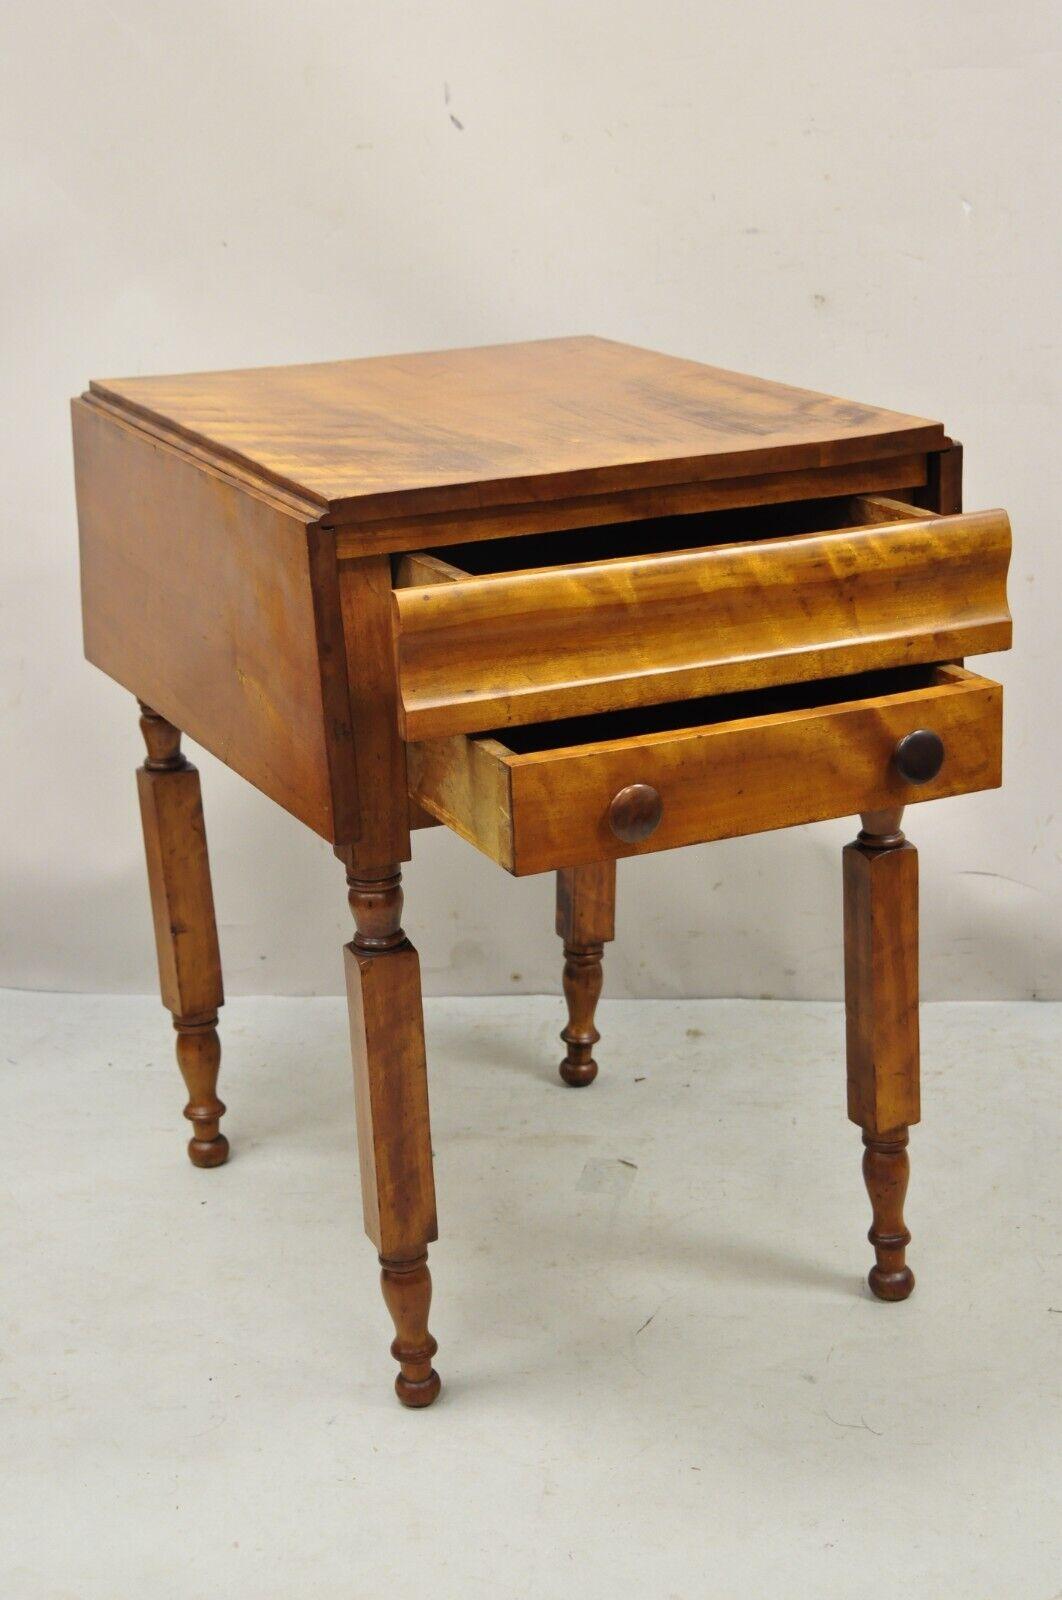 Antique Victorian Chestnut Drop Leaf Work Table Side Table with 2 Drawers In Good Condition For Sale In Philadelphia, PA